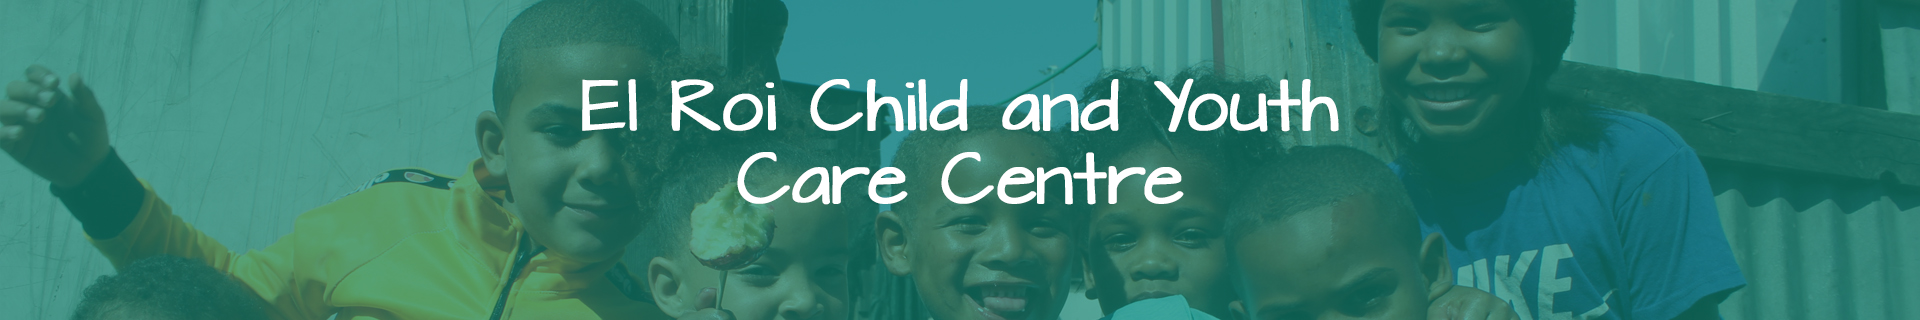 Child and Youth Care Centre